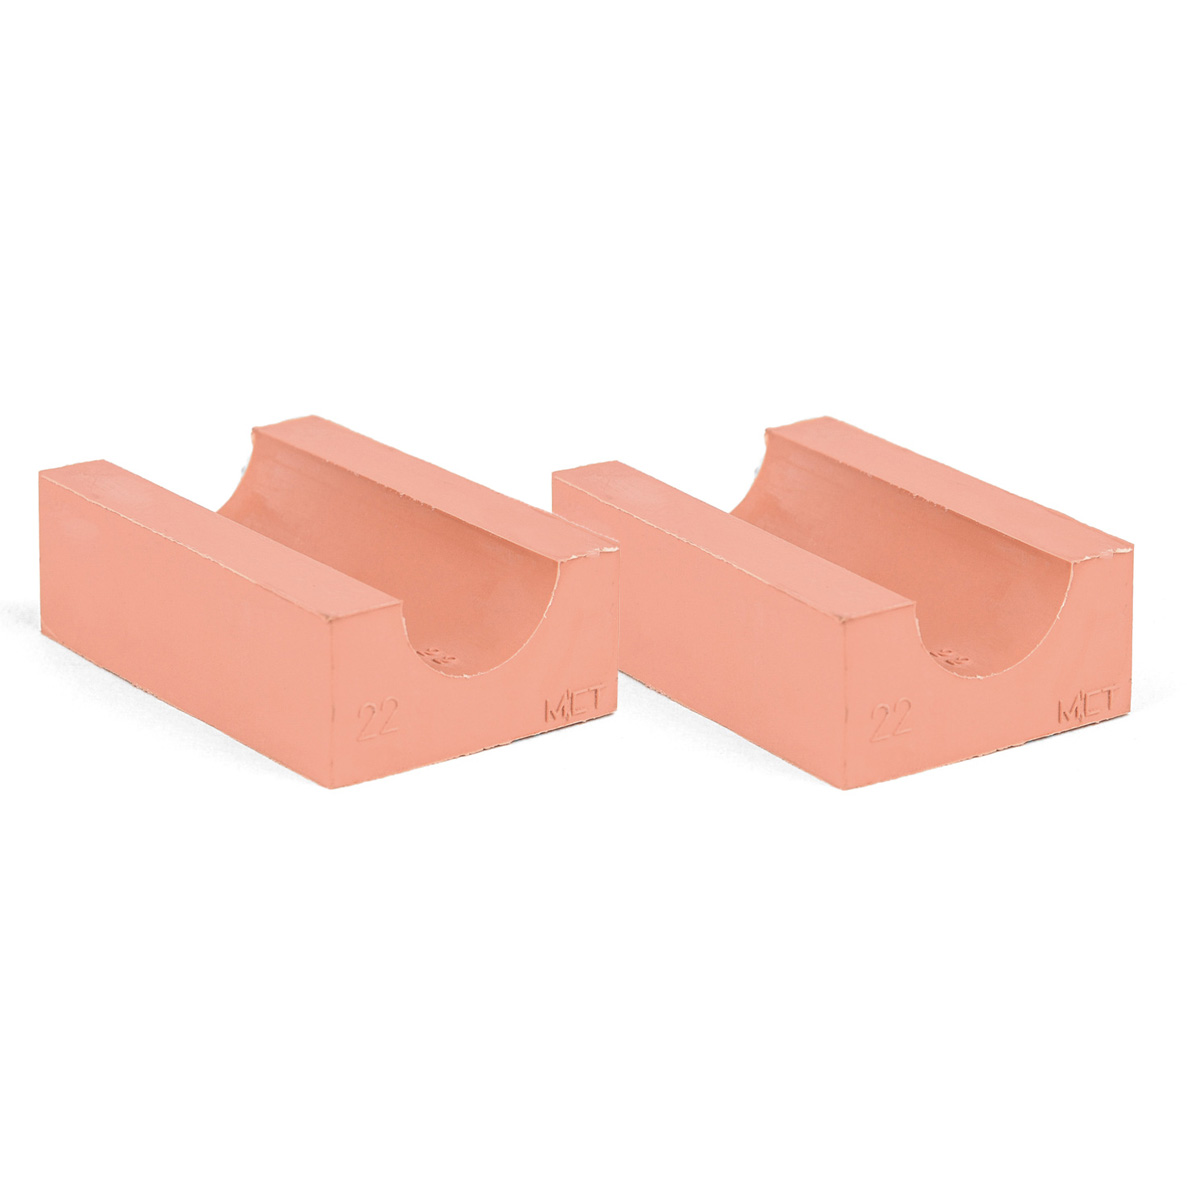 40-24*2 Set of 2 half insert block lycron, 40-24 for cable/pipe diam. 23.5-25.5mm